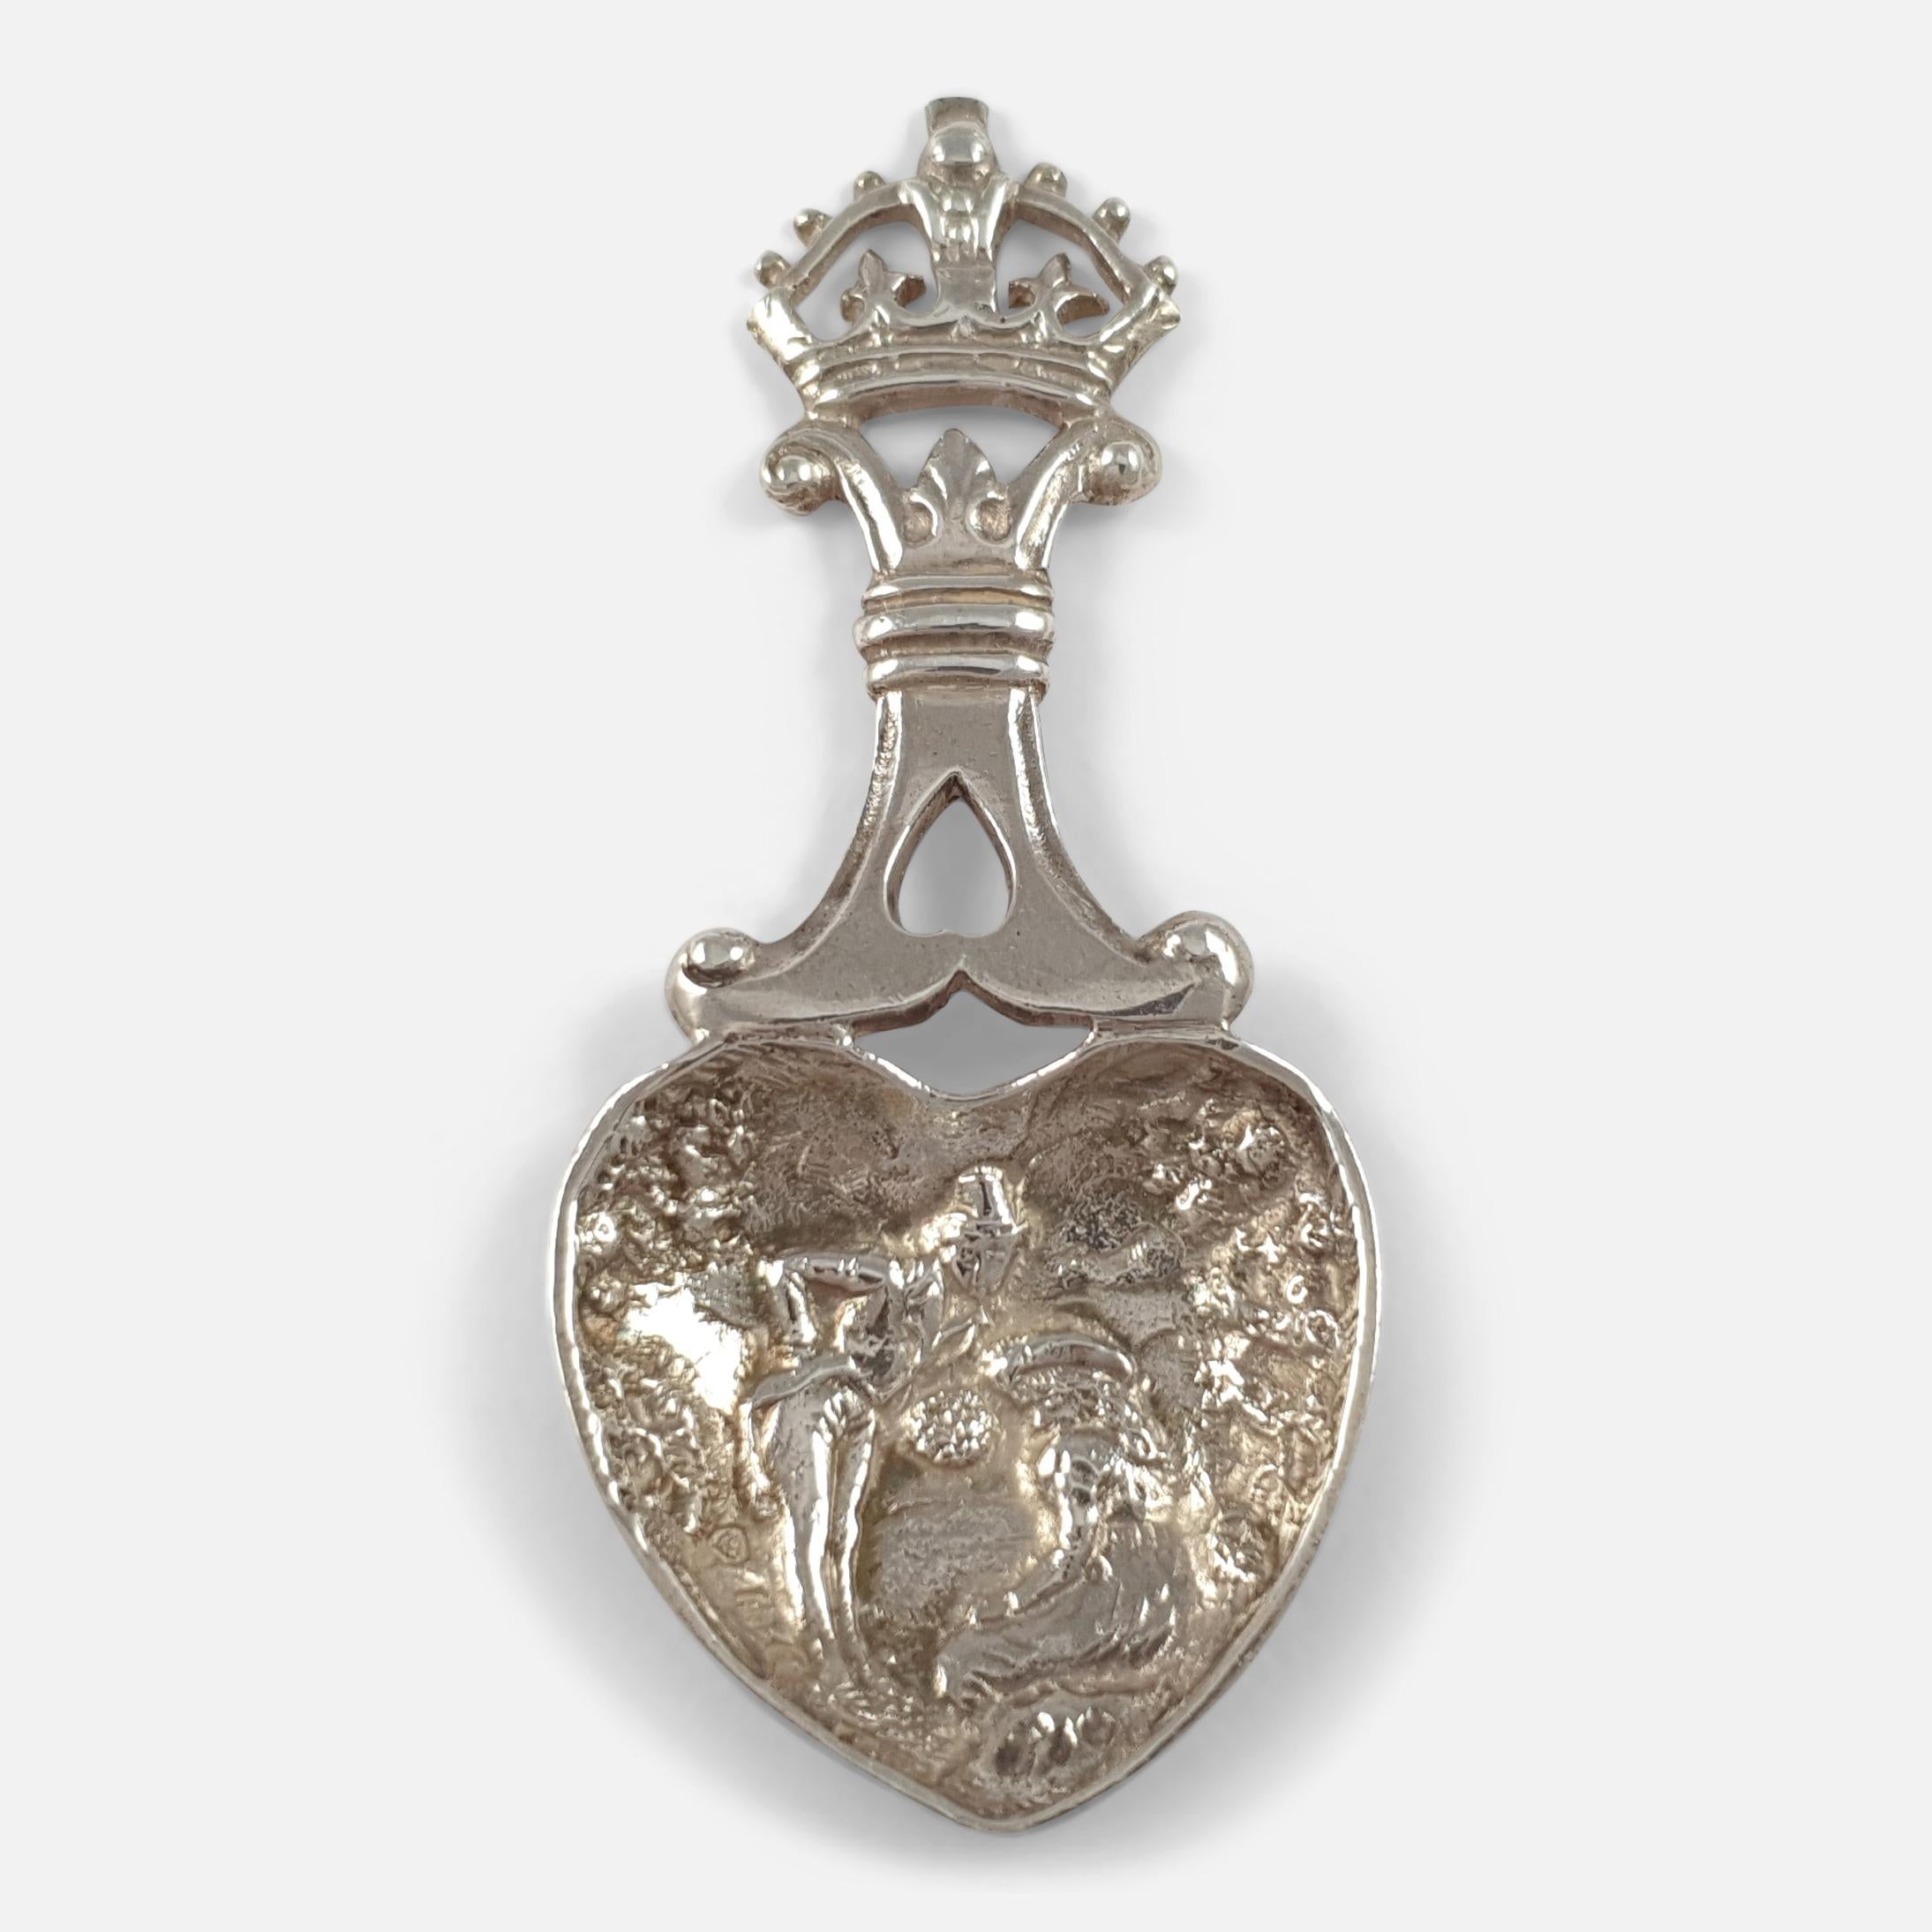 A Victorian Scottish sterling silver tea caddy spoon. The caddy spoon is crafted with an openwork crown finial, and a heart-shaped bowl, with a courting couple in relief. It was made by the silversmith J.M. Talbot, and hallmarked Edinburgh,